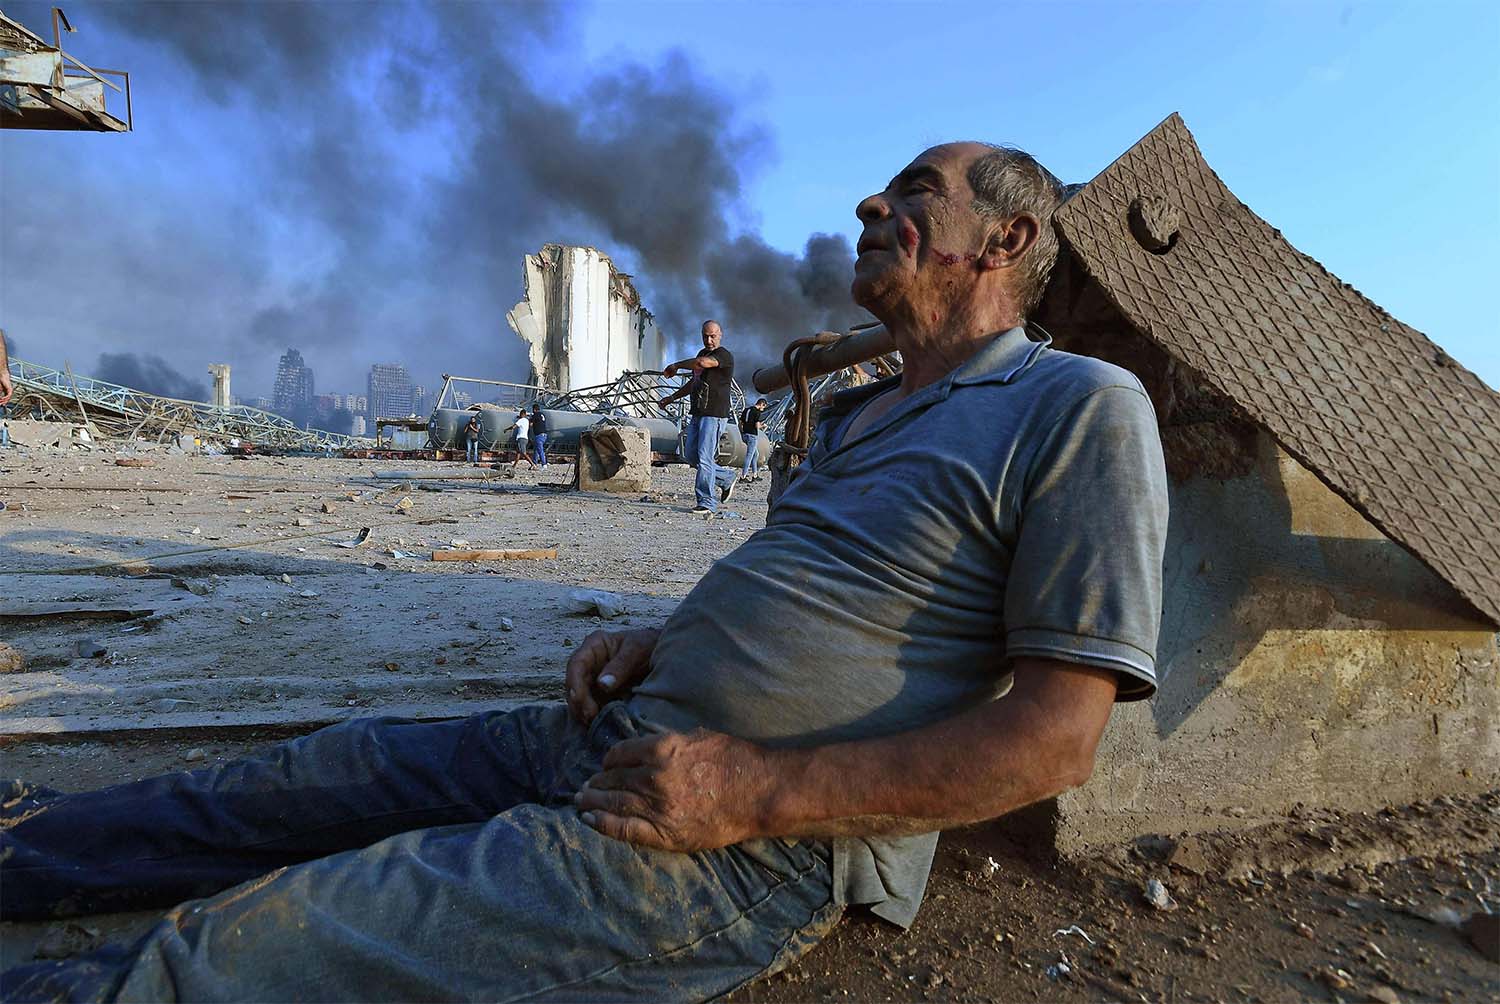 A wounded man sits on the ground waiting for aid at Beirut's port 